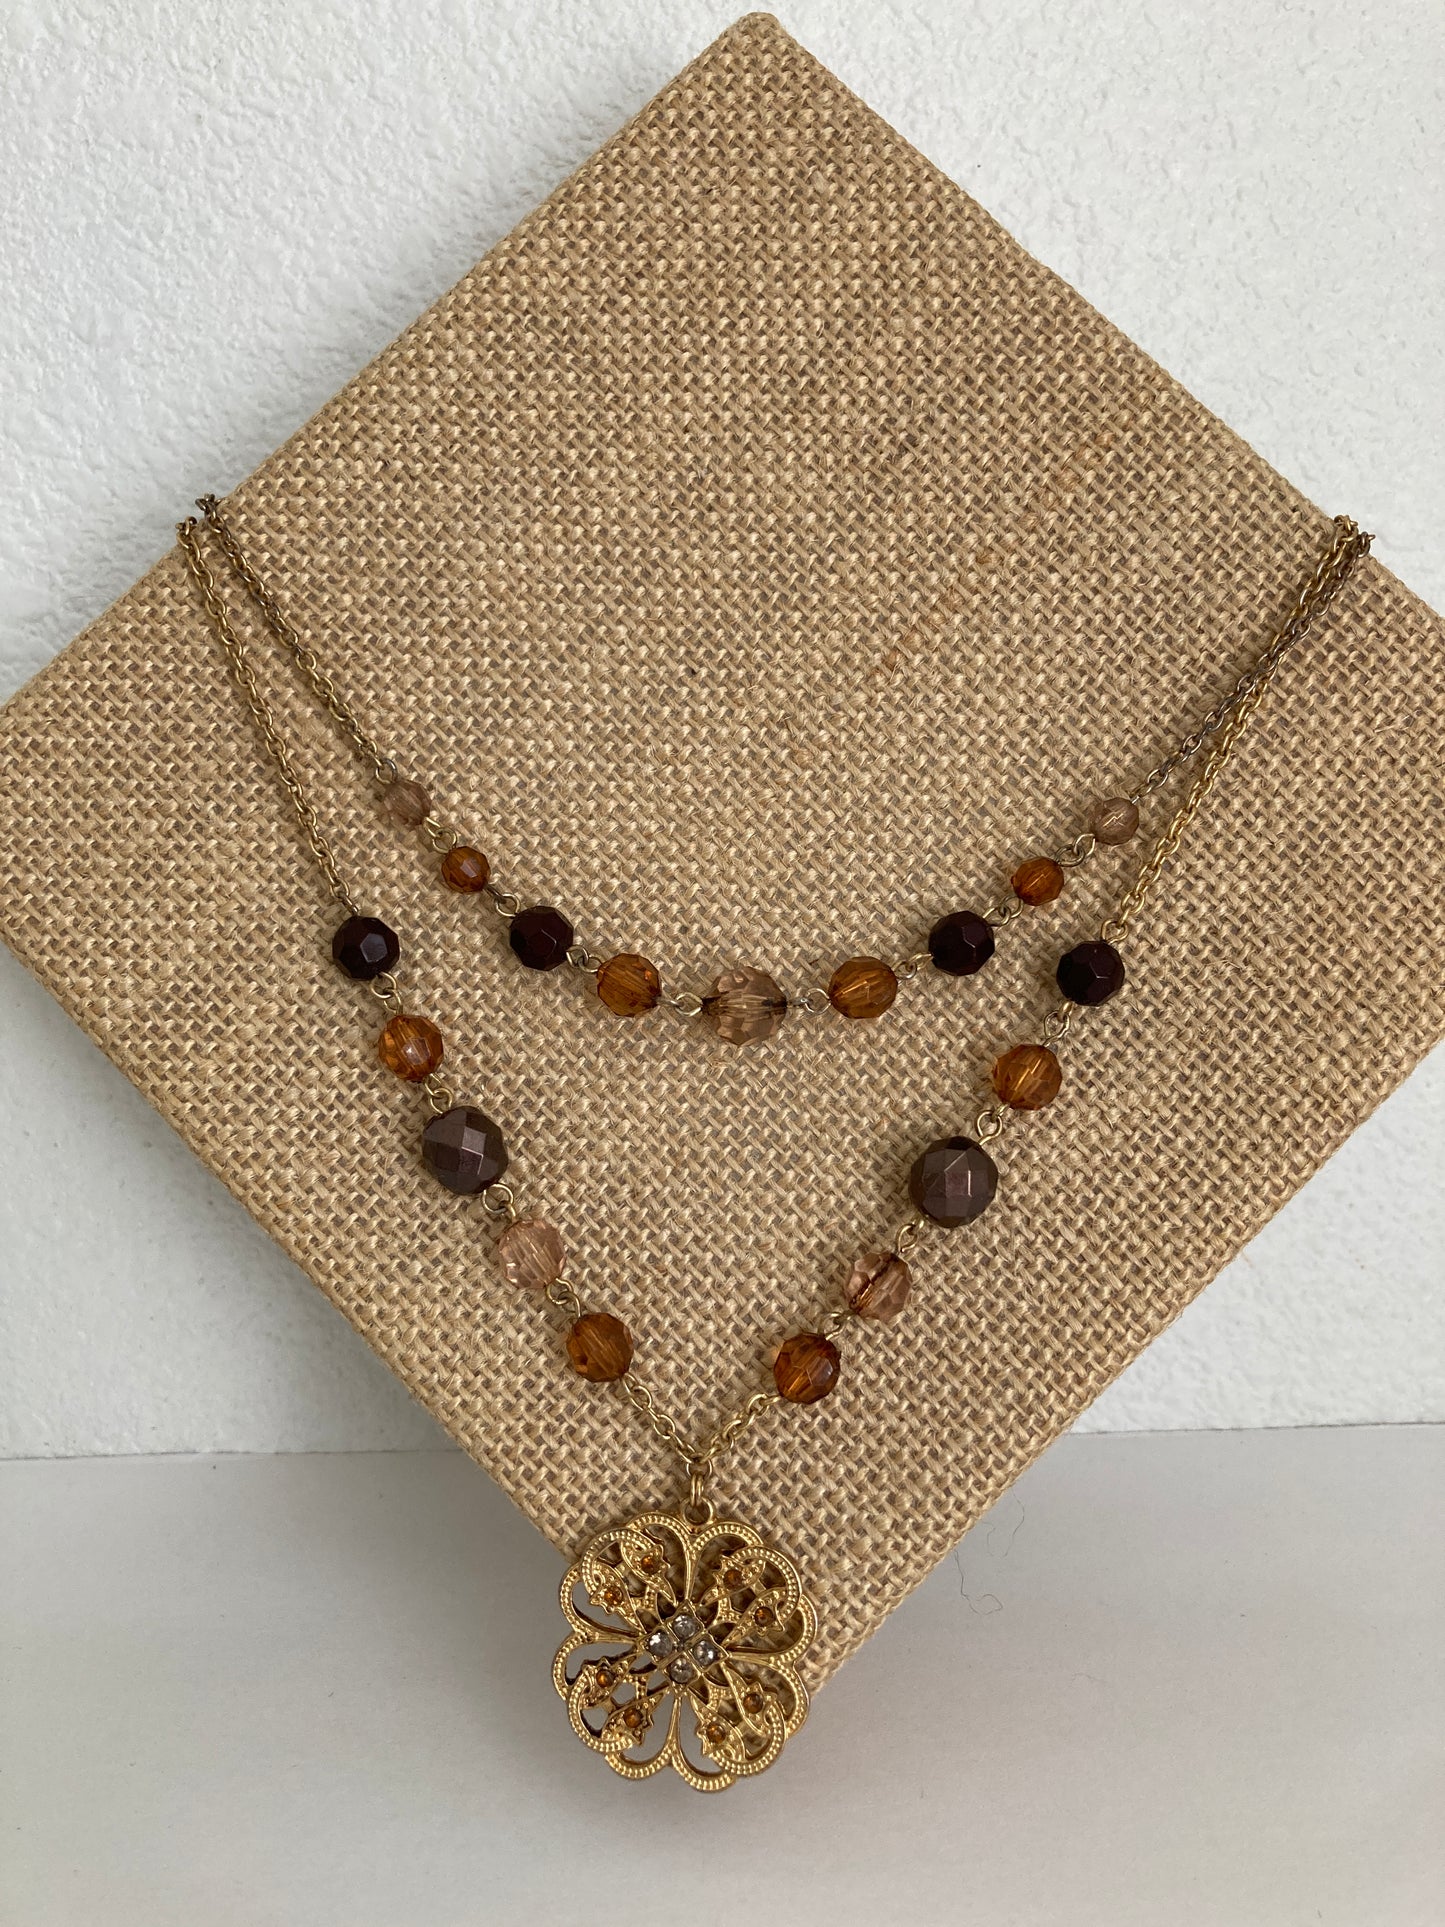 Double Layer Necklace Brown Beads Gold Tone Pendant & Chain